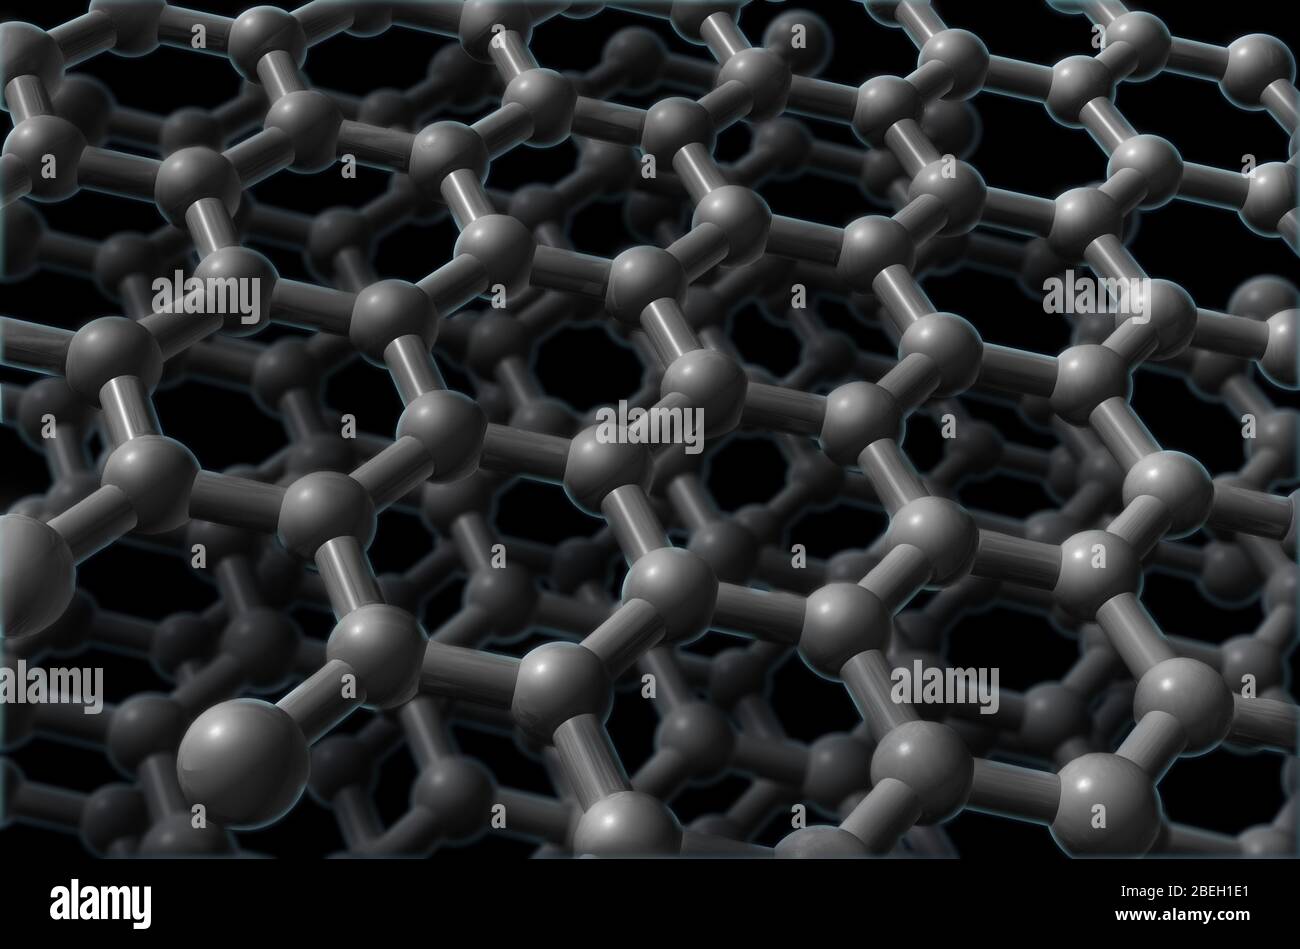 A molecular model of graphite, a mineral composed of stacked layers of carbon atoms arranged in a honeycomb lattice. Graphite is considered the most stable form of carbon under standard conditions and is used in thermochemistry for defining the heat formation of carbon compounds.  The Ancient Greek word for 'draw/write,' gave graphite its name for its mark-making ability and use in pencils. However graphite is also an electrical conductor and has been increasingly used to manufacture batteries. Stock Photo